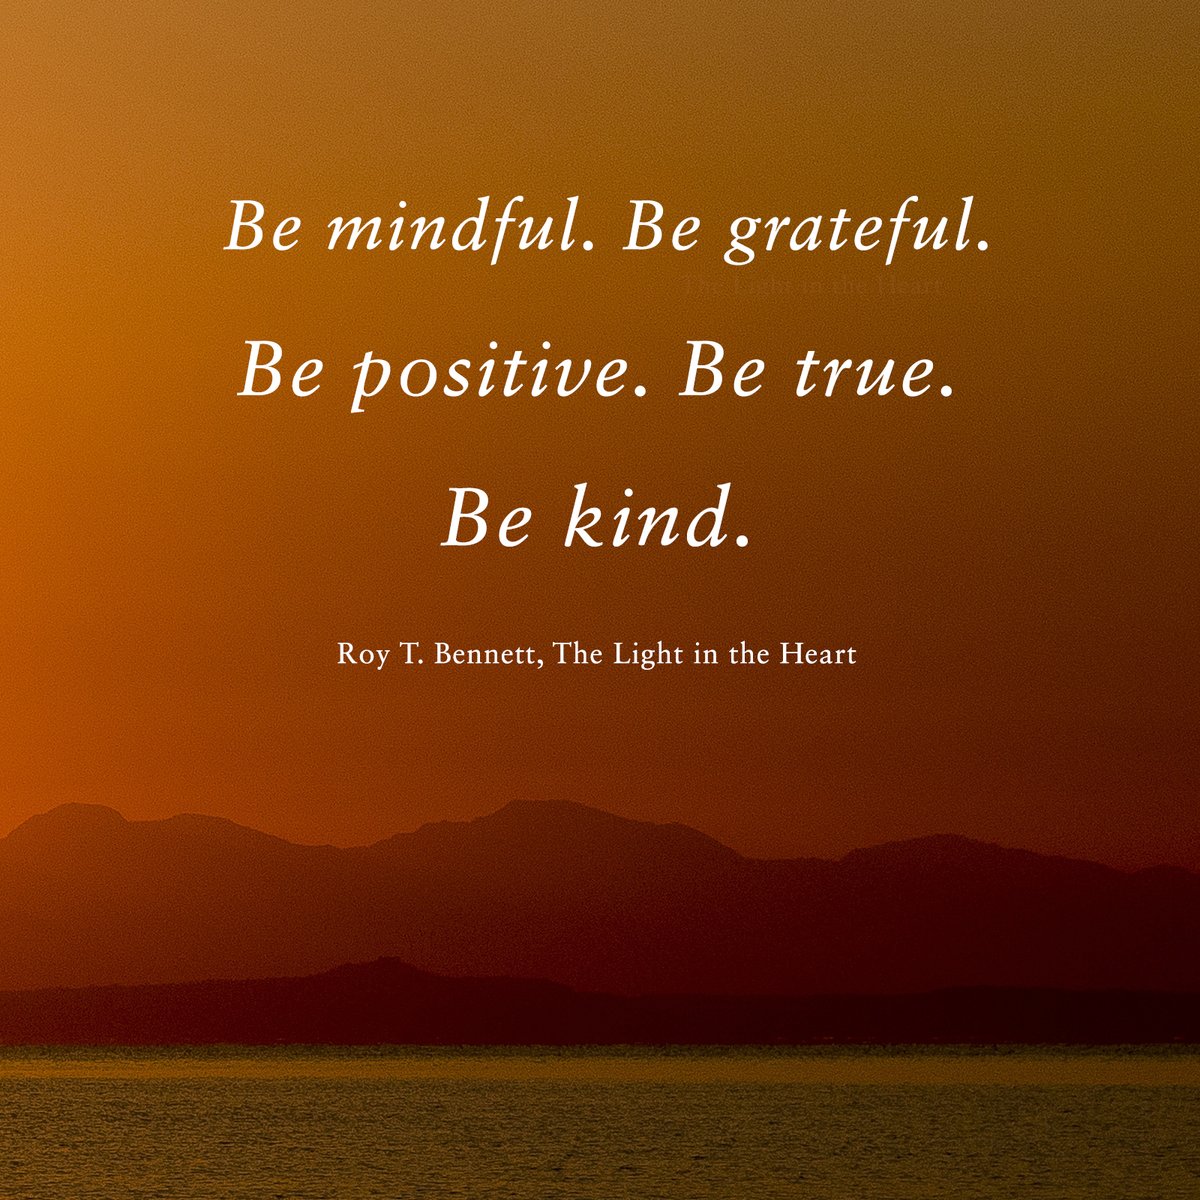 Be mindful. Be grateful. Be positive. Be true. Be kind. Roy T. Bennett, The Light in the Heart #motivation #Inspiration #quote #quotes #RoyTBennett